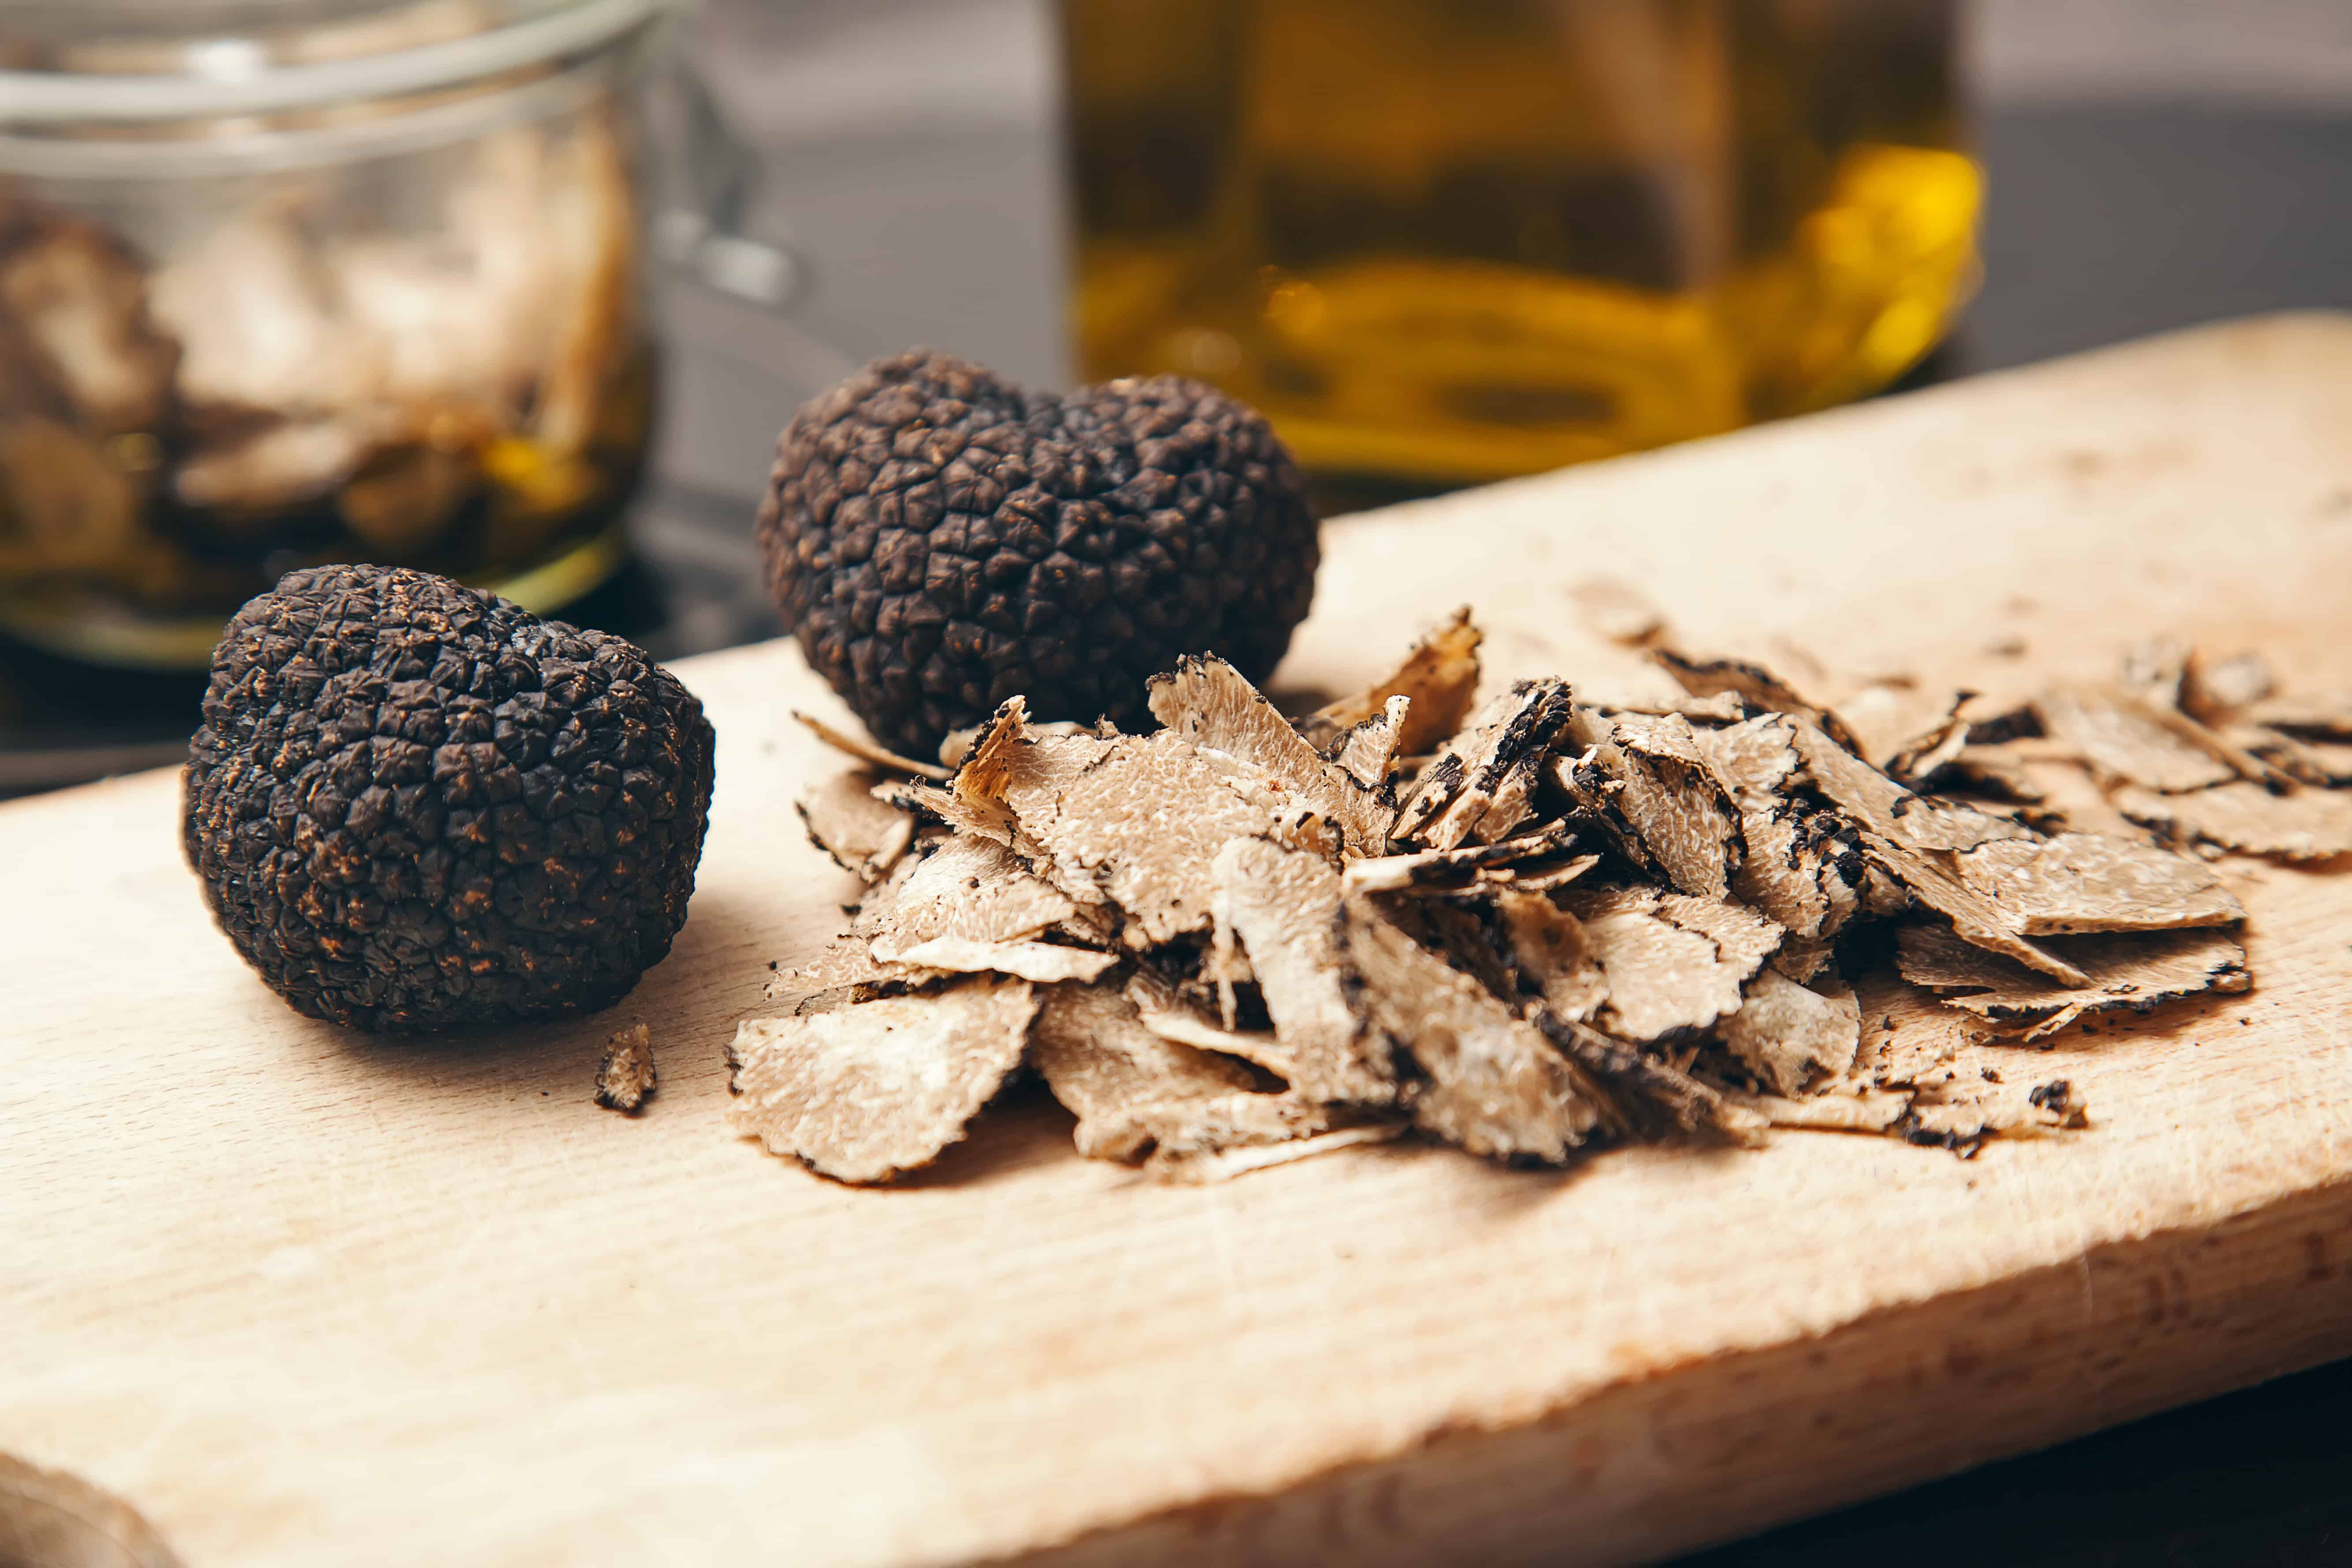 30 Truffle Facts About The World's Most Expensive Fungus | Facts.net